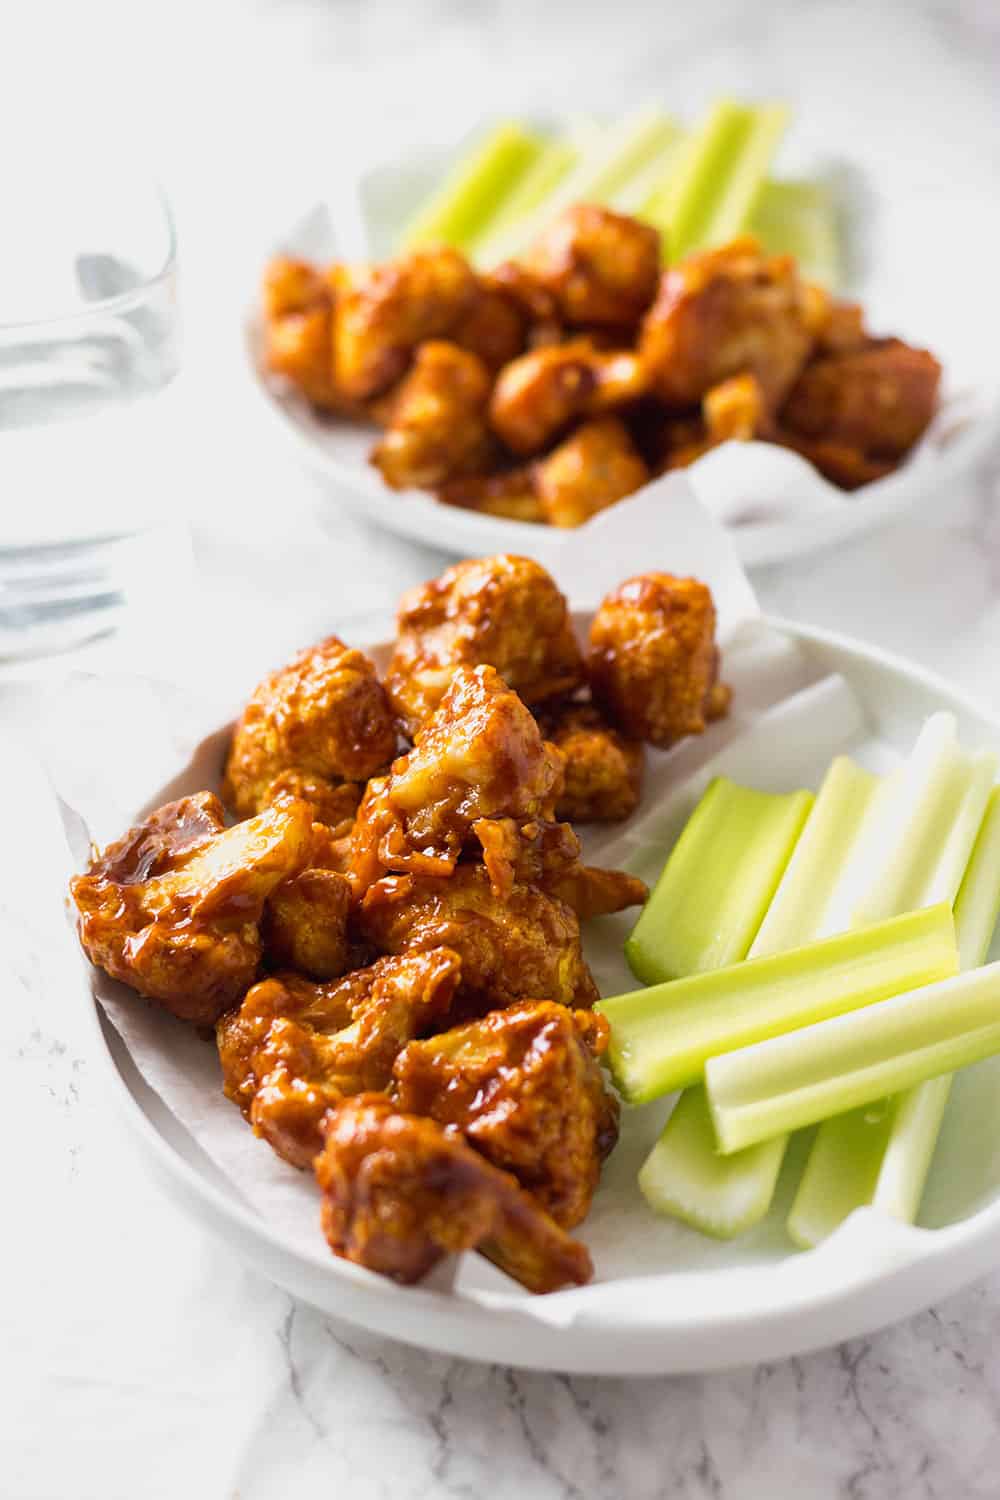 BARBECUE CAULIFLOWER WINGS BY HEALTHIER STEPS